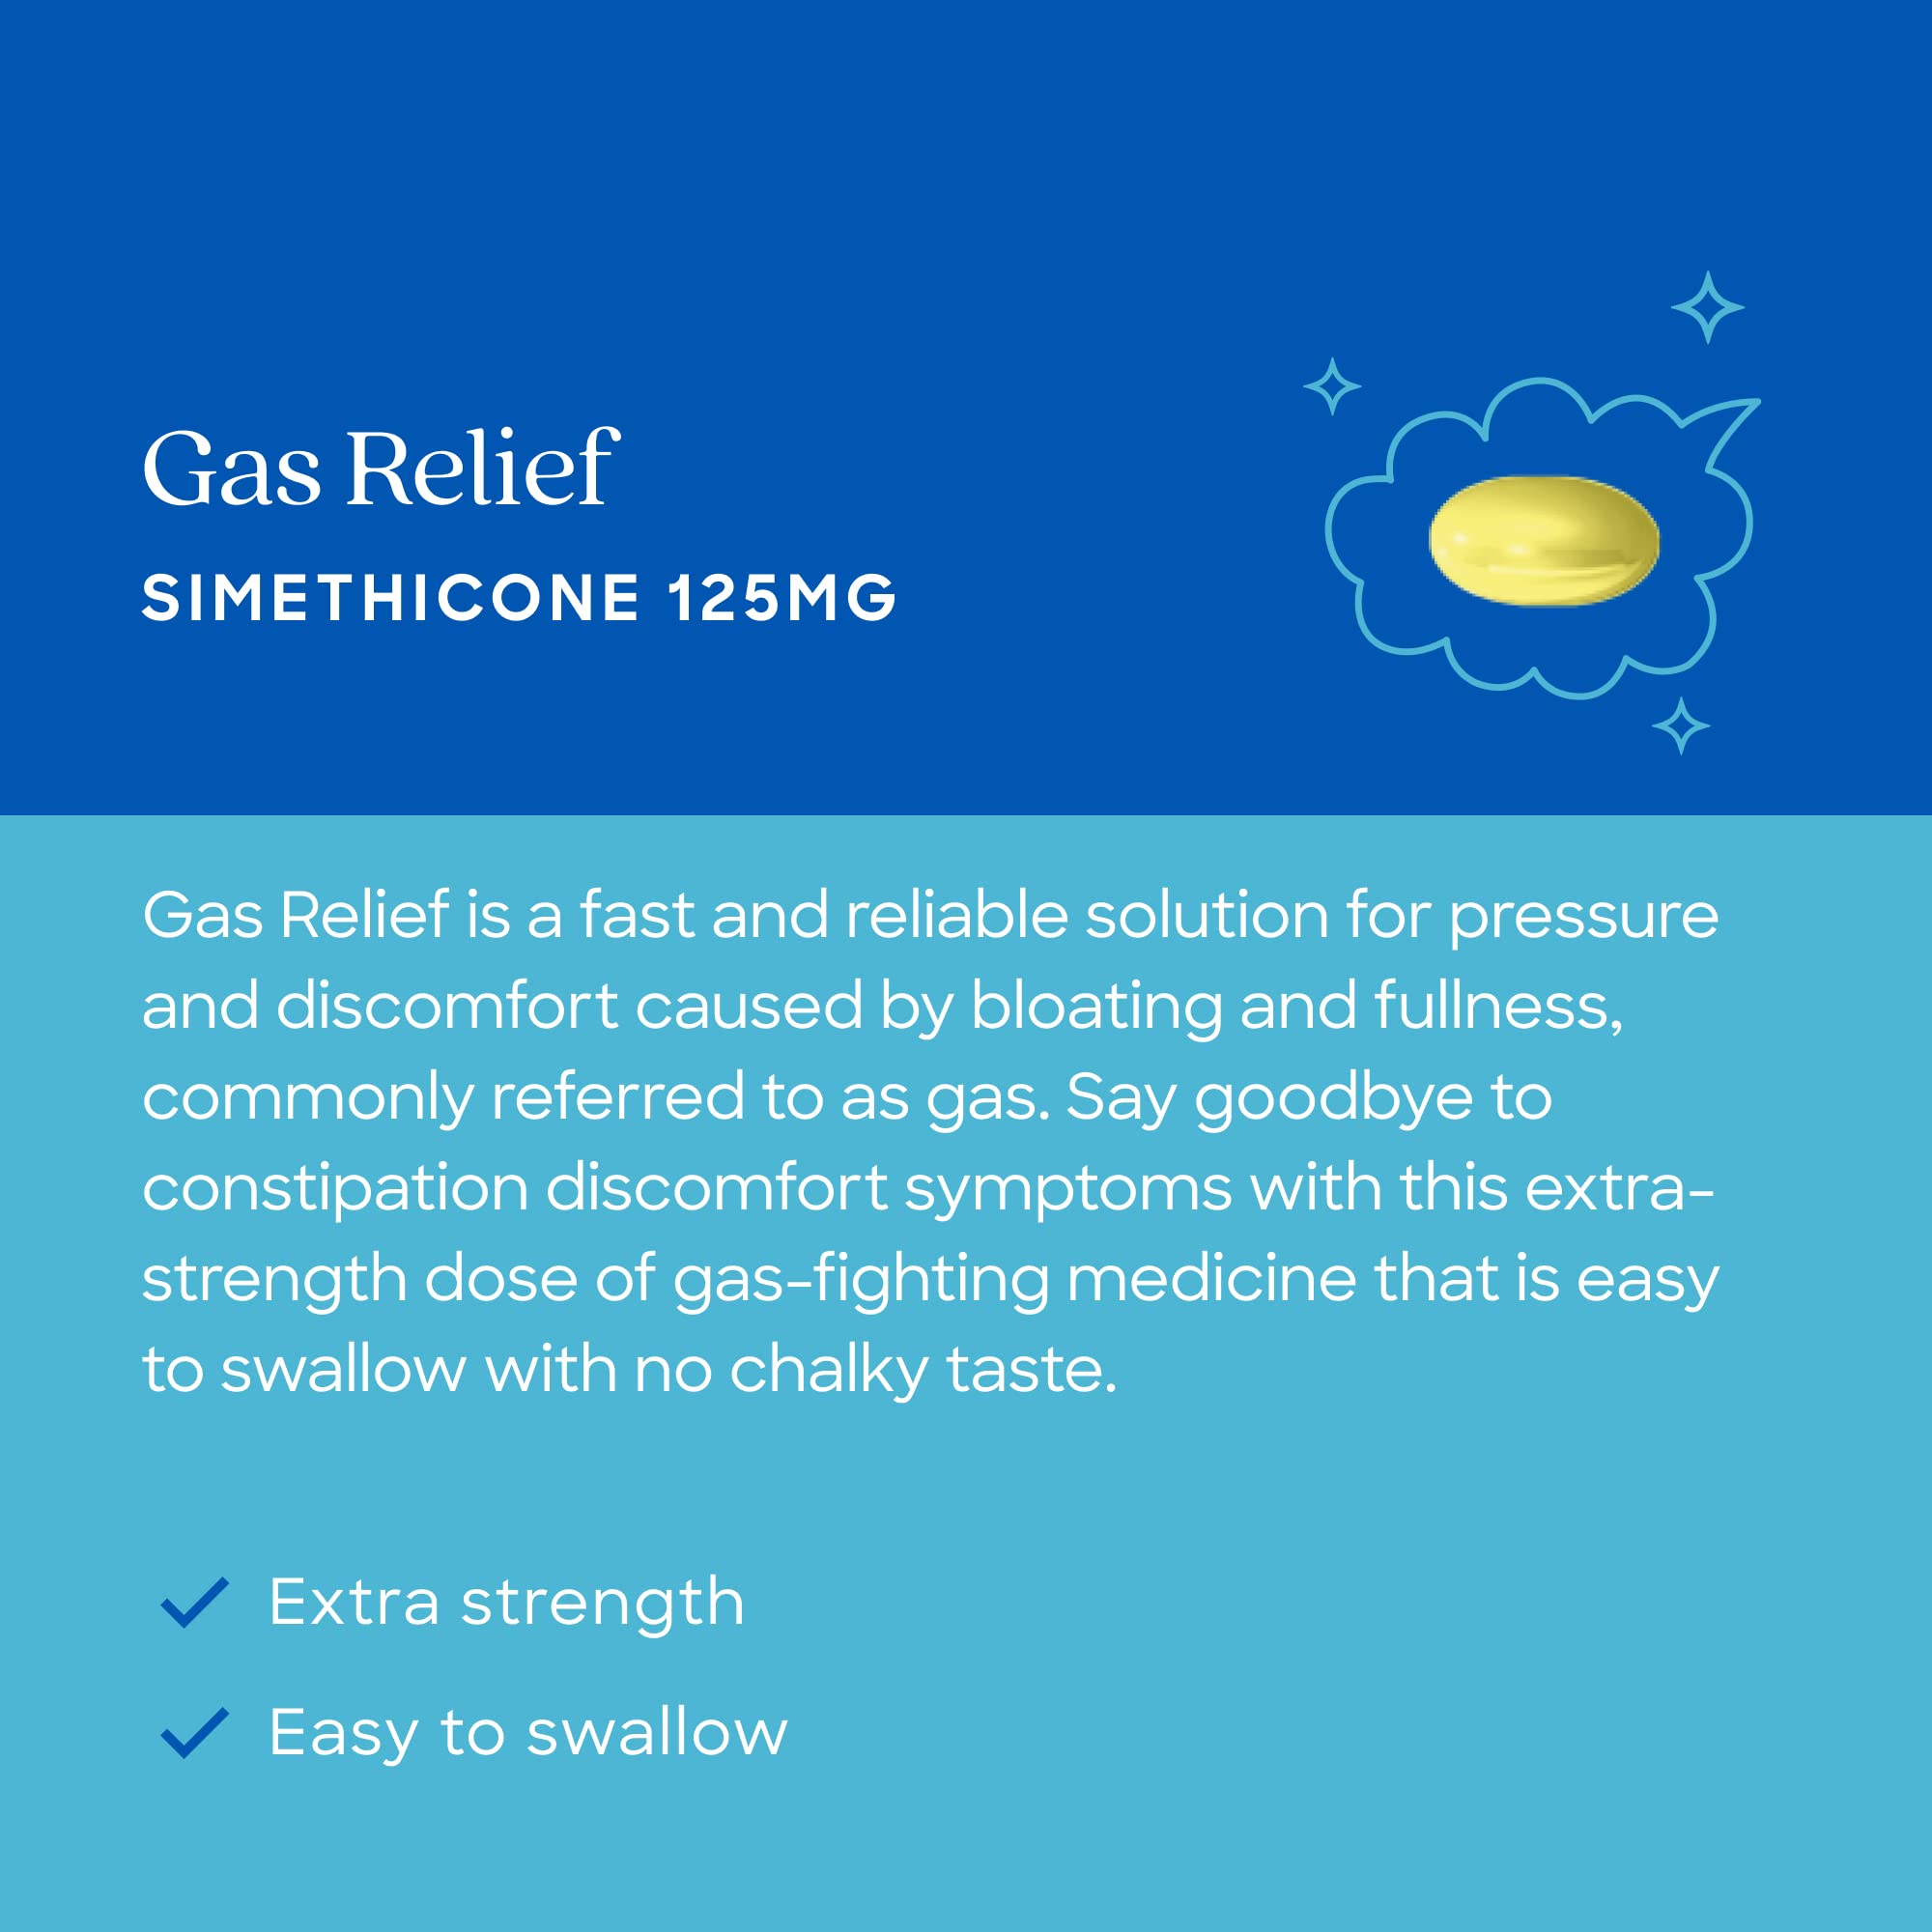 BETR REMEDIES Gas Relief - Simethicone 125 mg Tablets - Bloating and Gas Relief for Adults - Easy-to-Swallow Pills - 30 Softgels